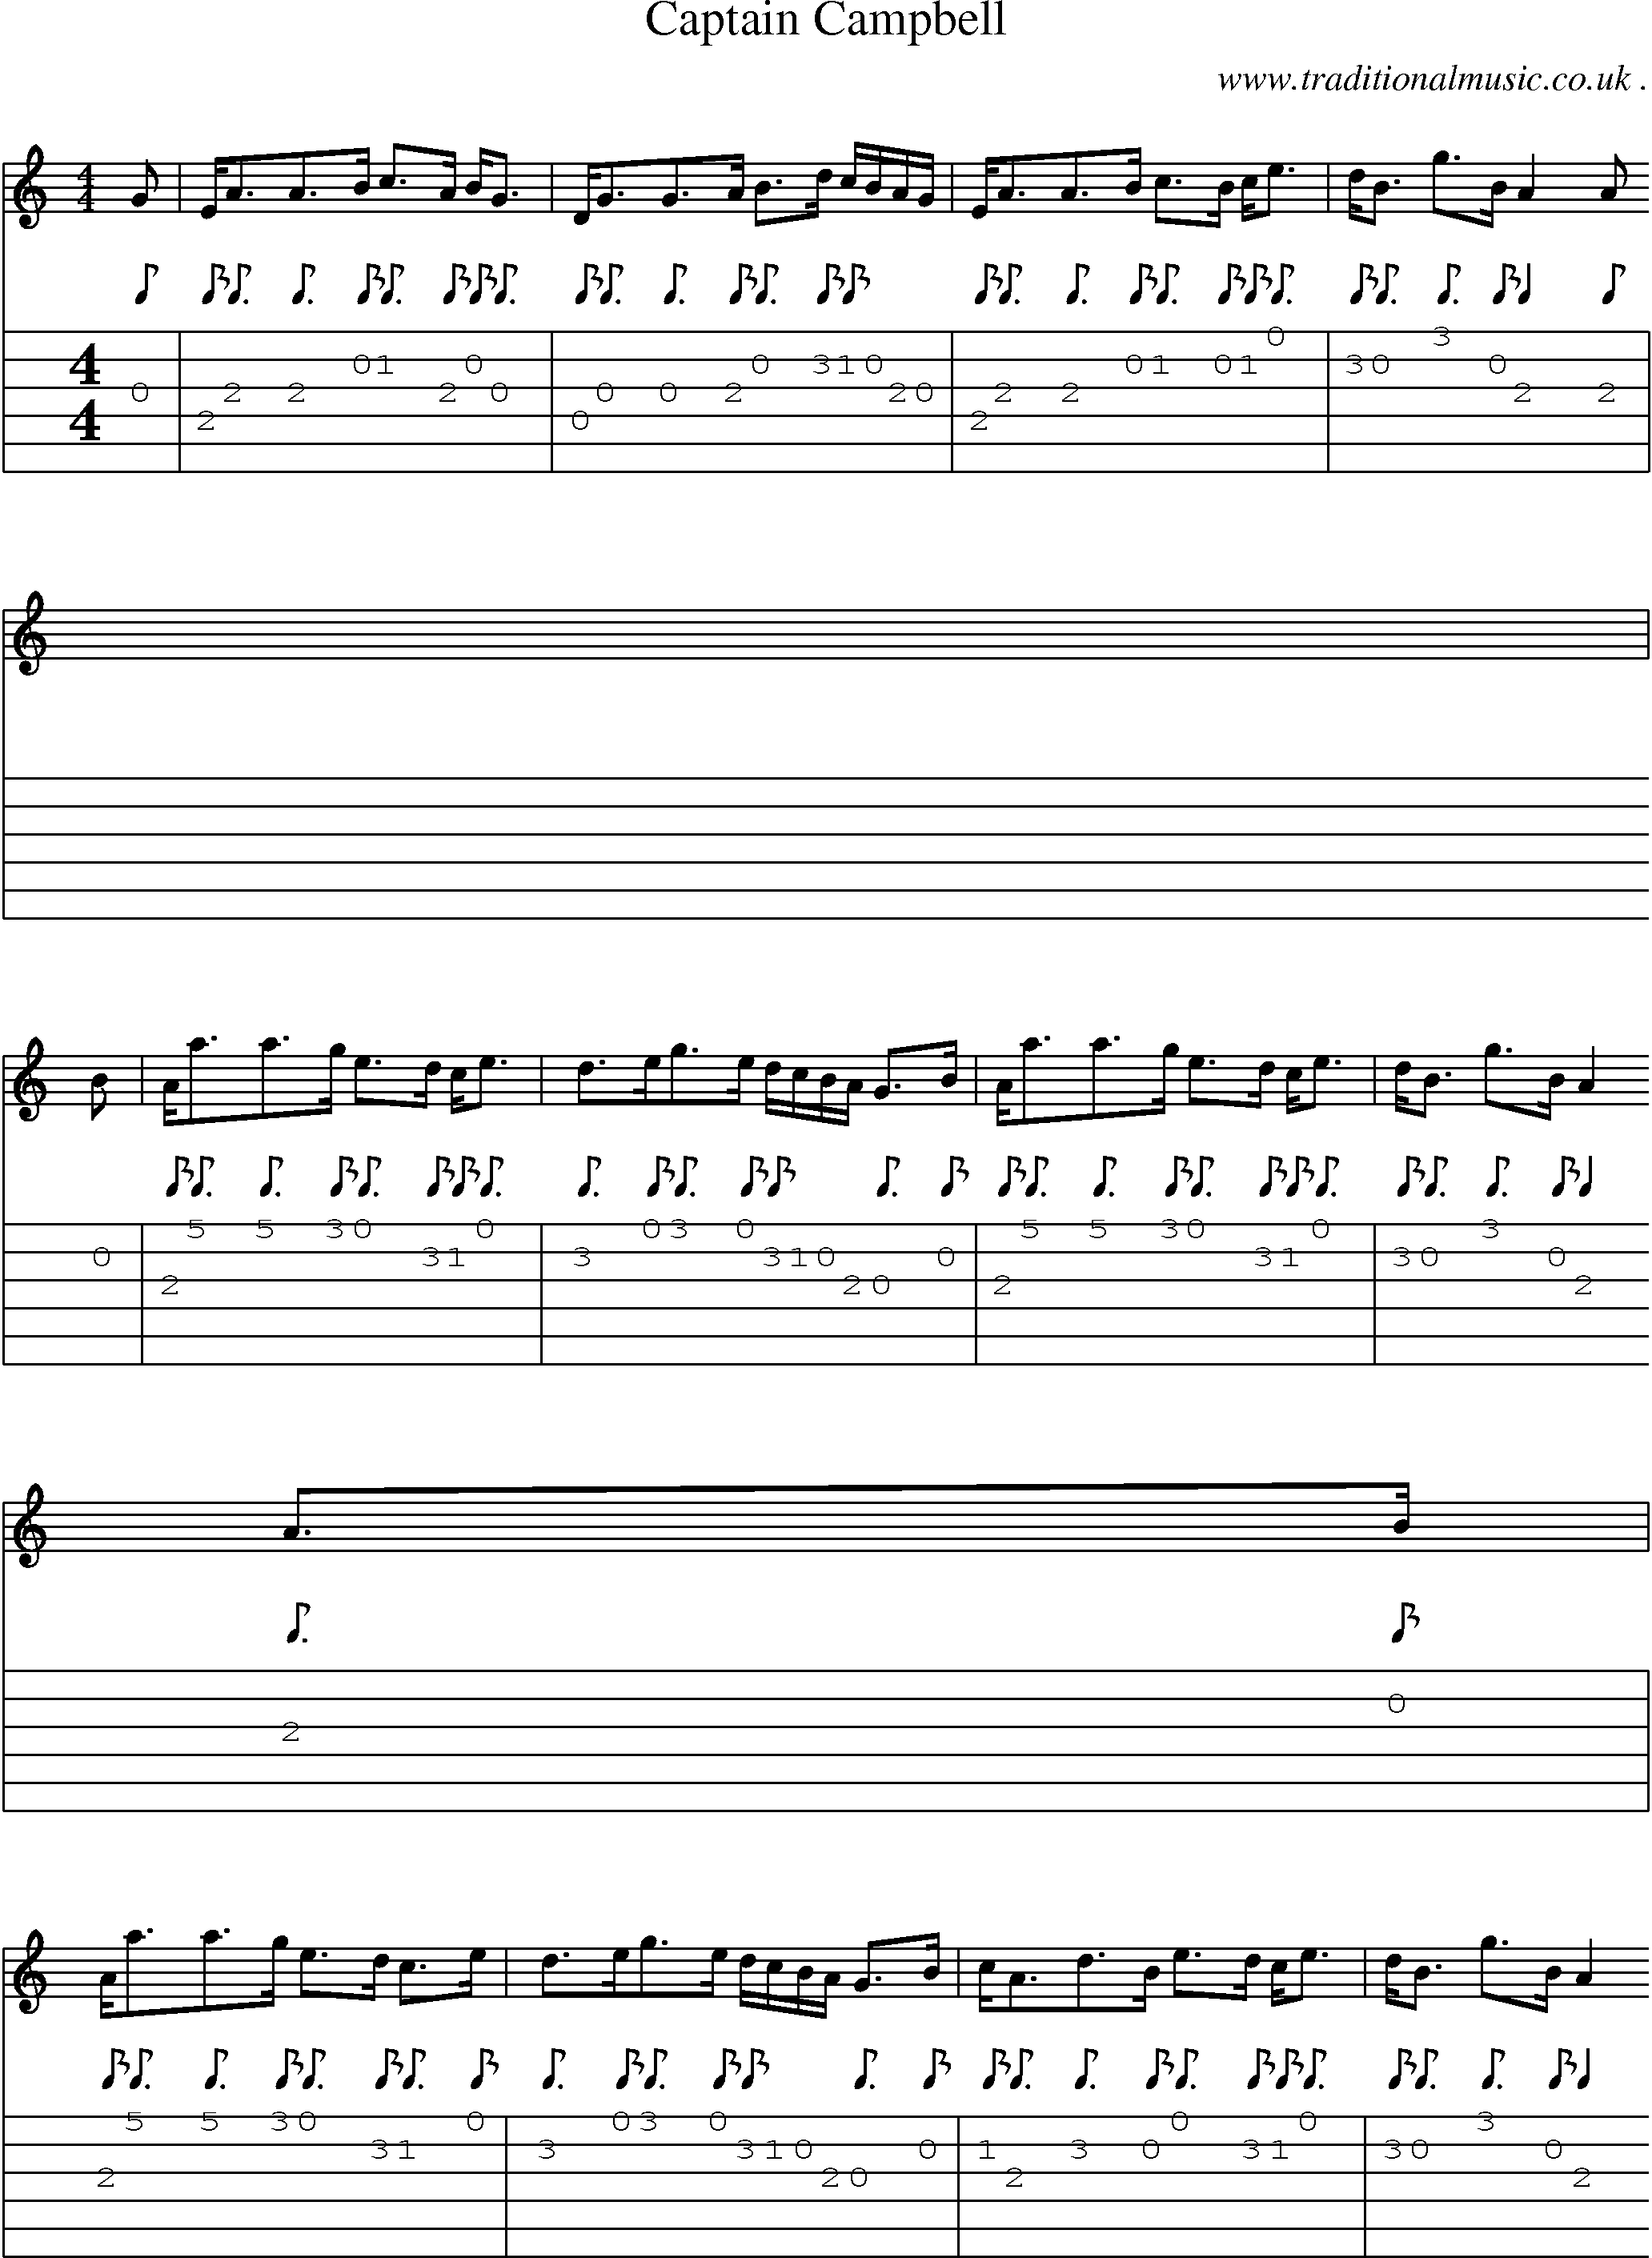 Sheet-music  score, Chords and Guitar Tabs for Captain Campbell